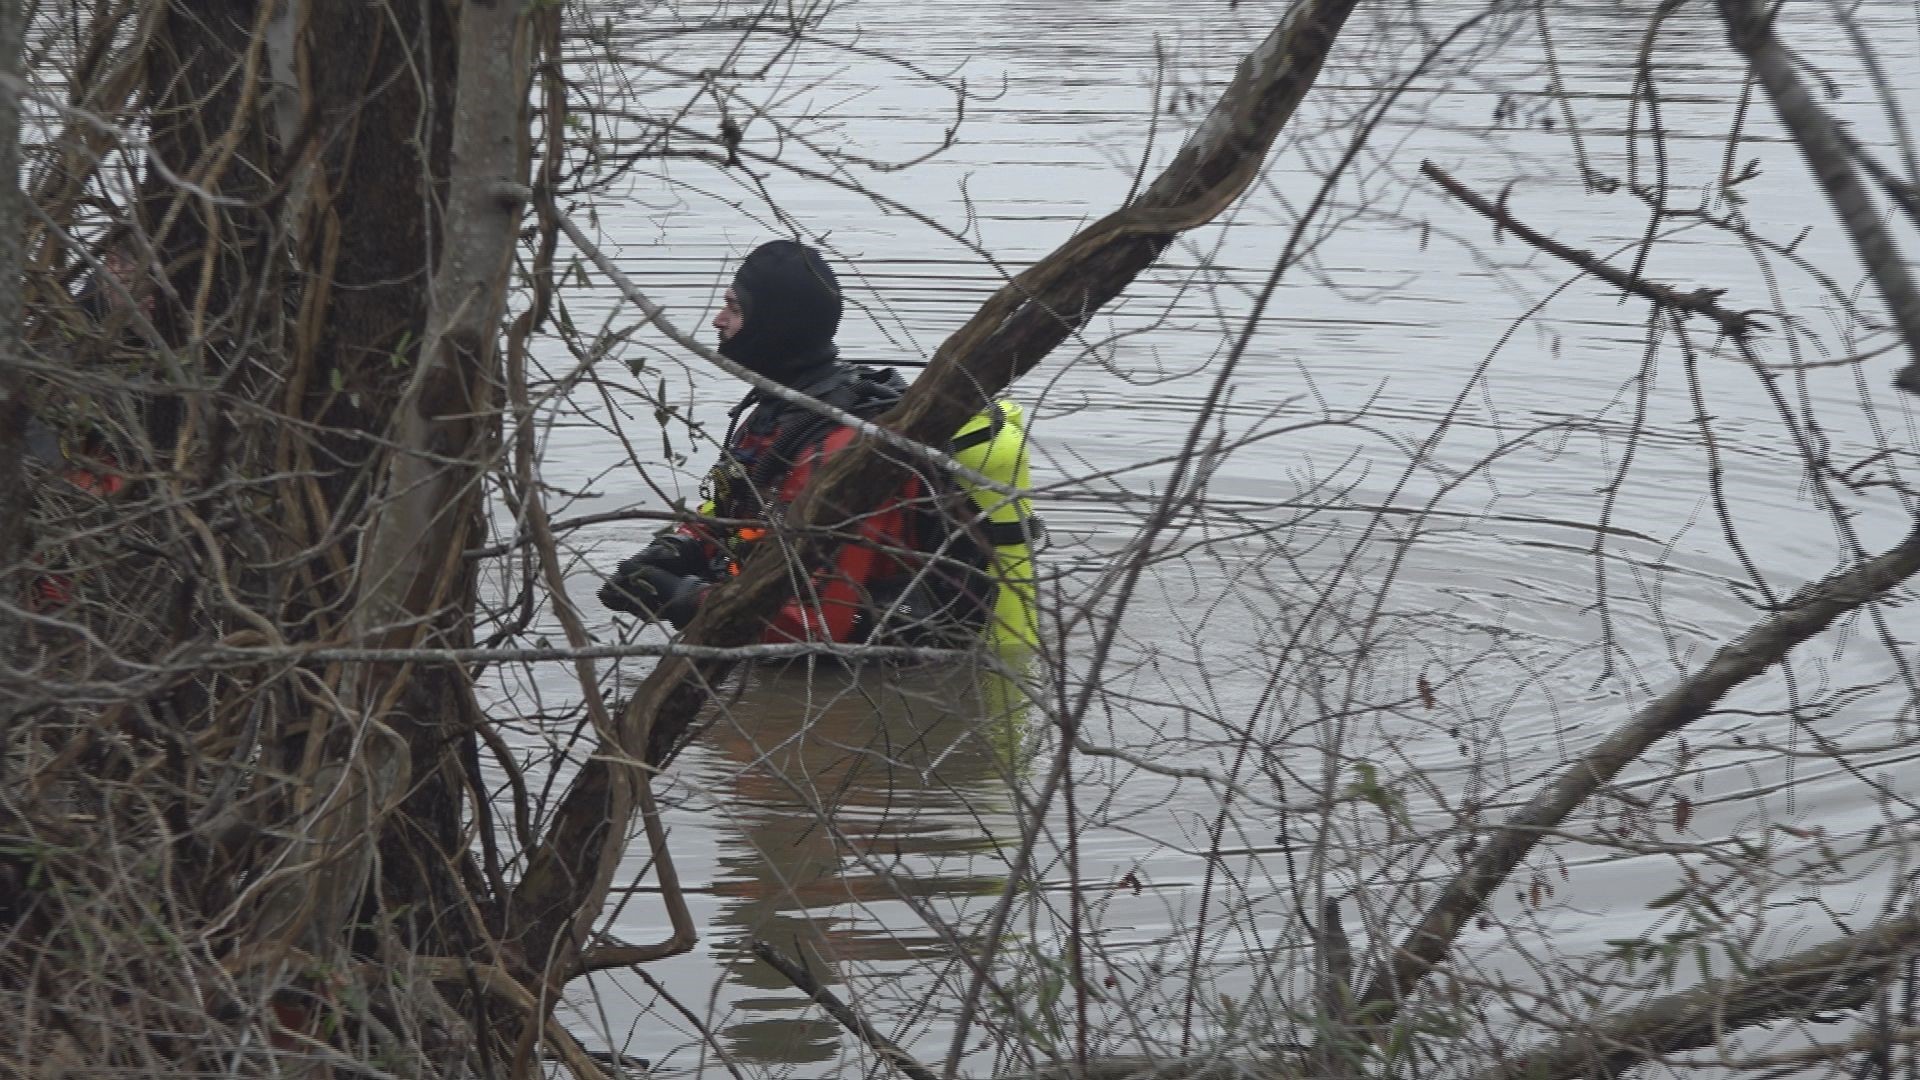 The Guilford County Sheriff’s Office Dive Team assisted with evidence retrieval from a body of water off of Church Street near Air Harbor Road on Tuesday.